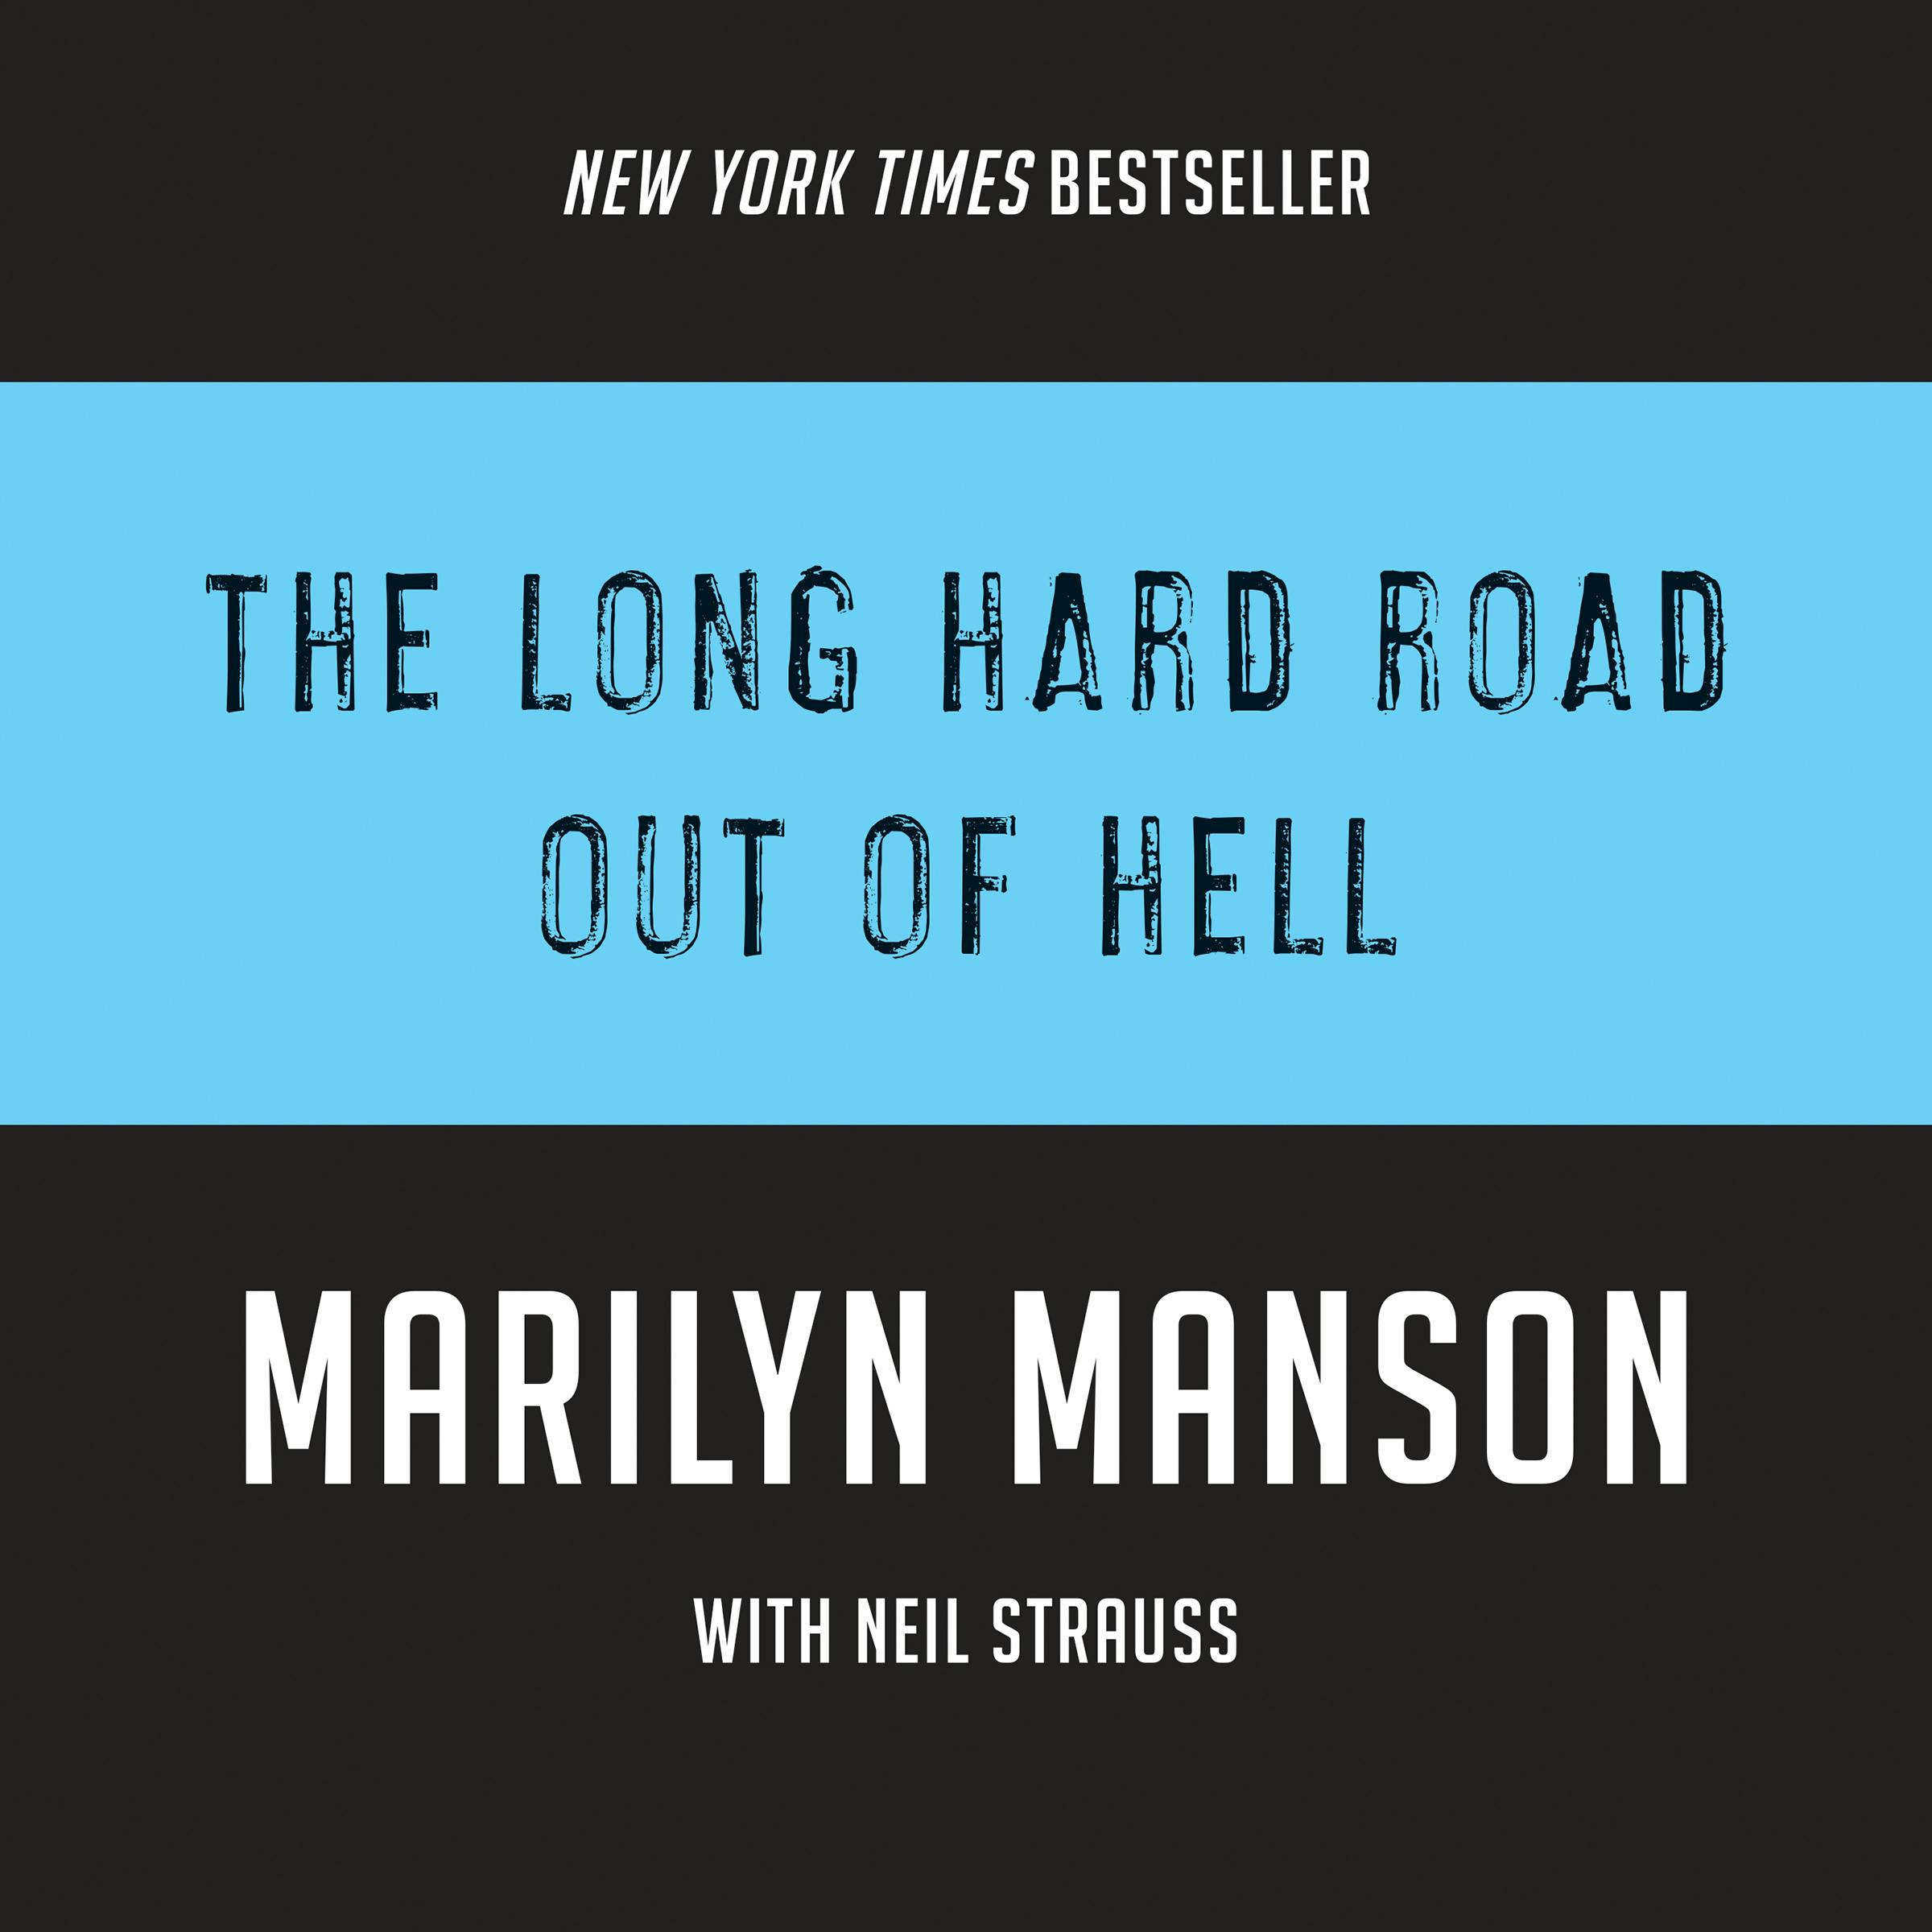 The Long Hard Road Out of Hell - Marilyn Manson, Neil Strauss